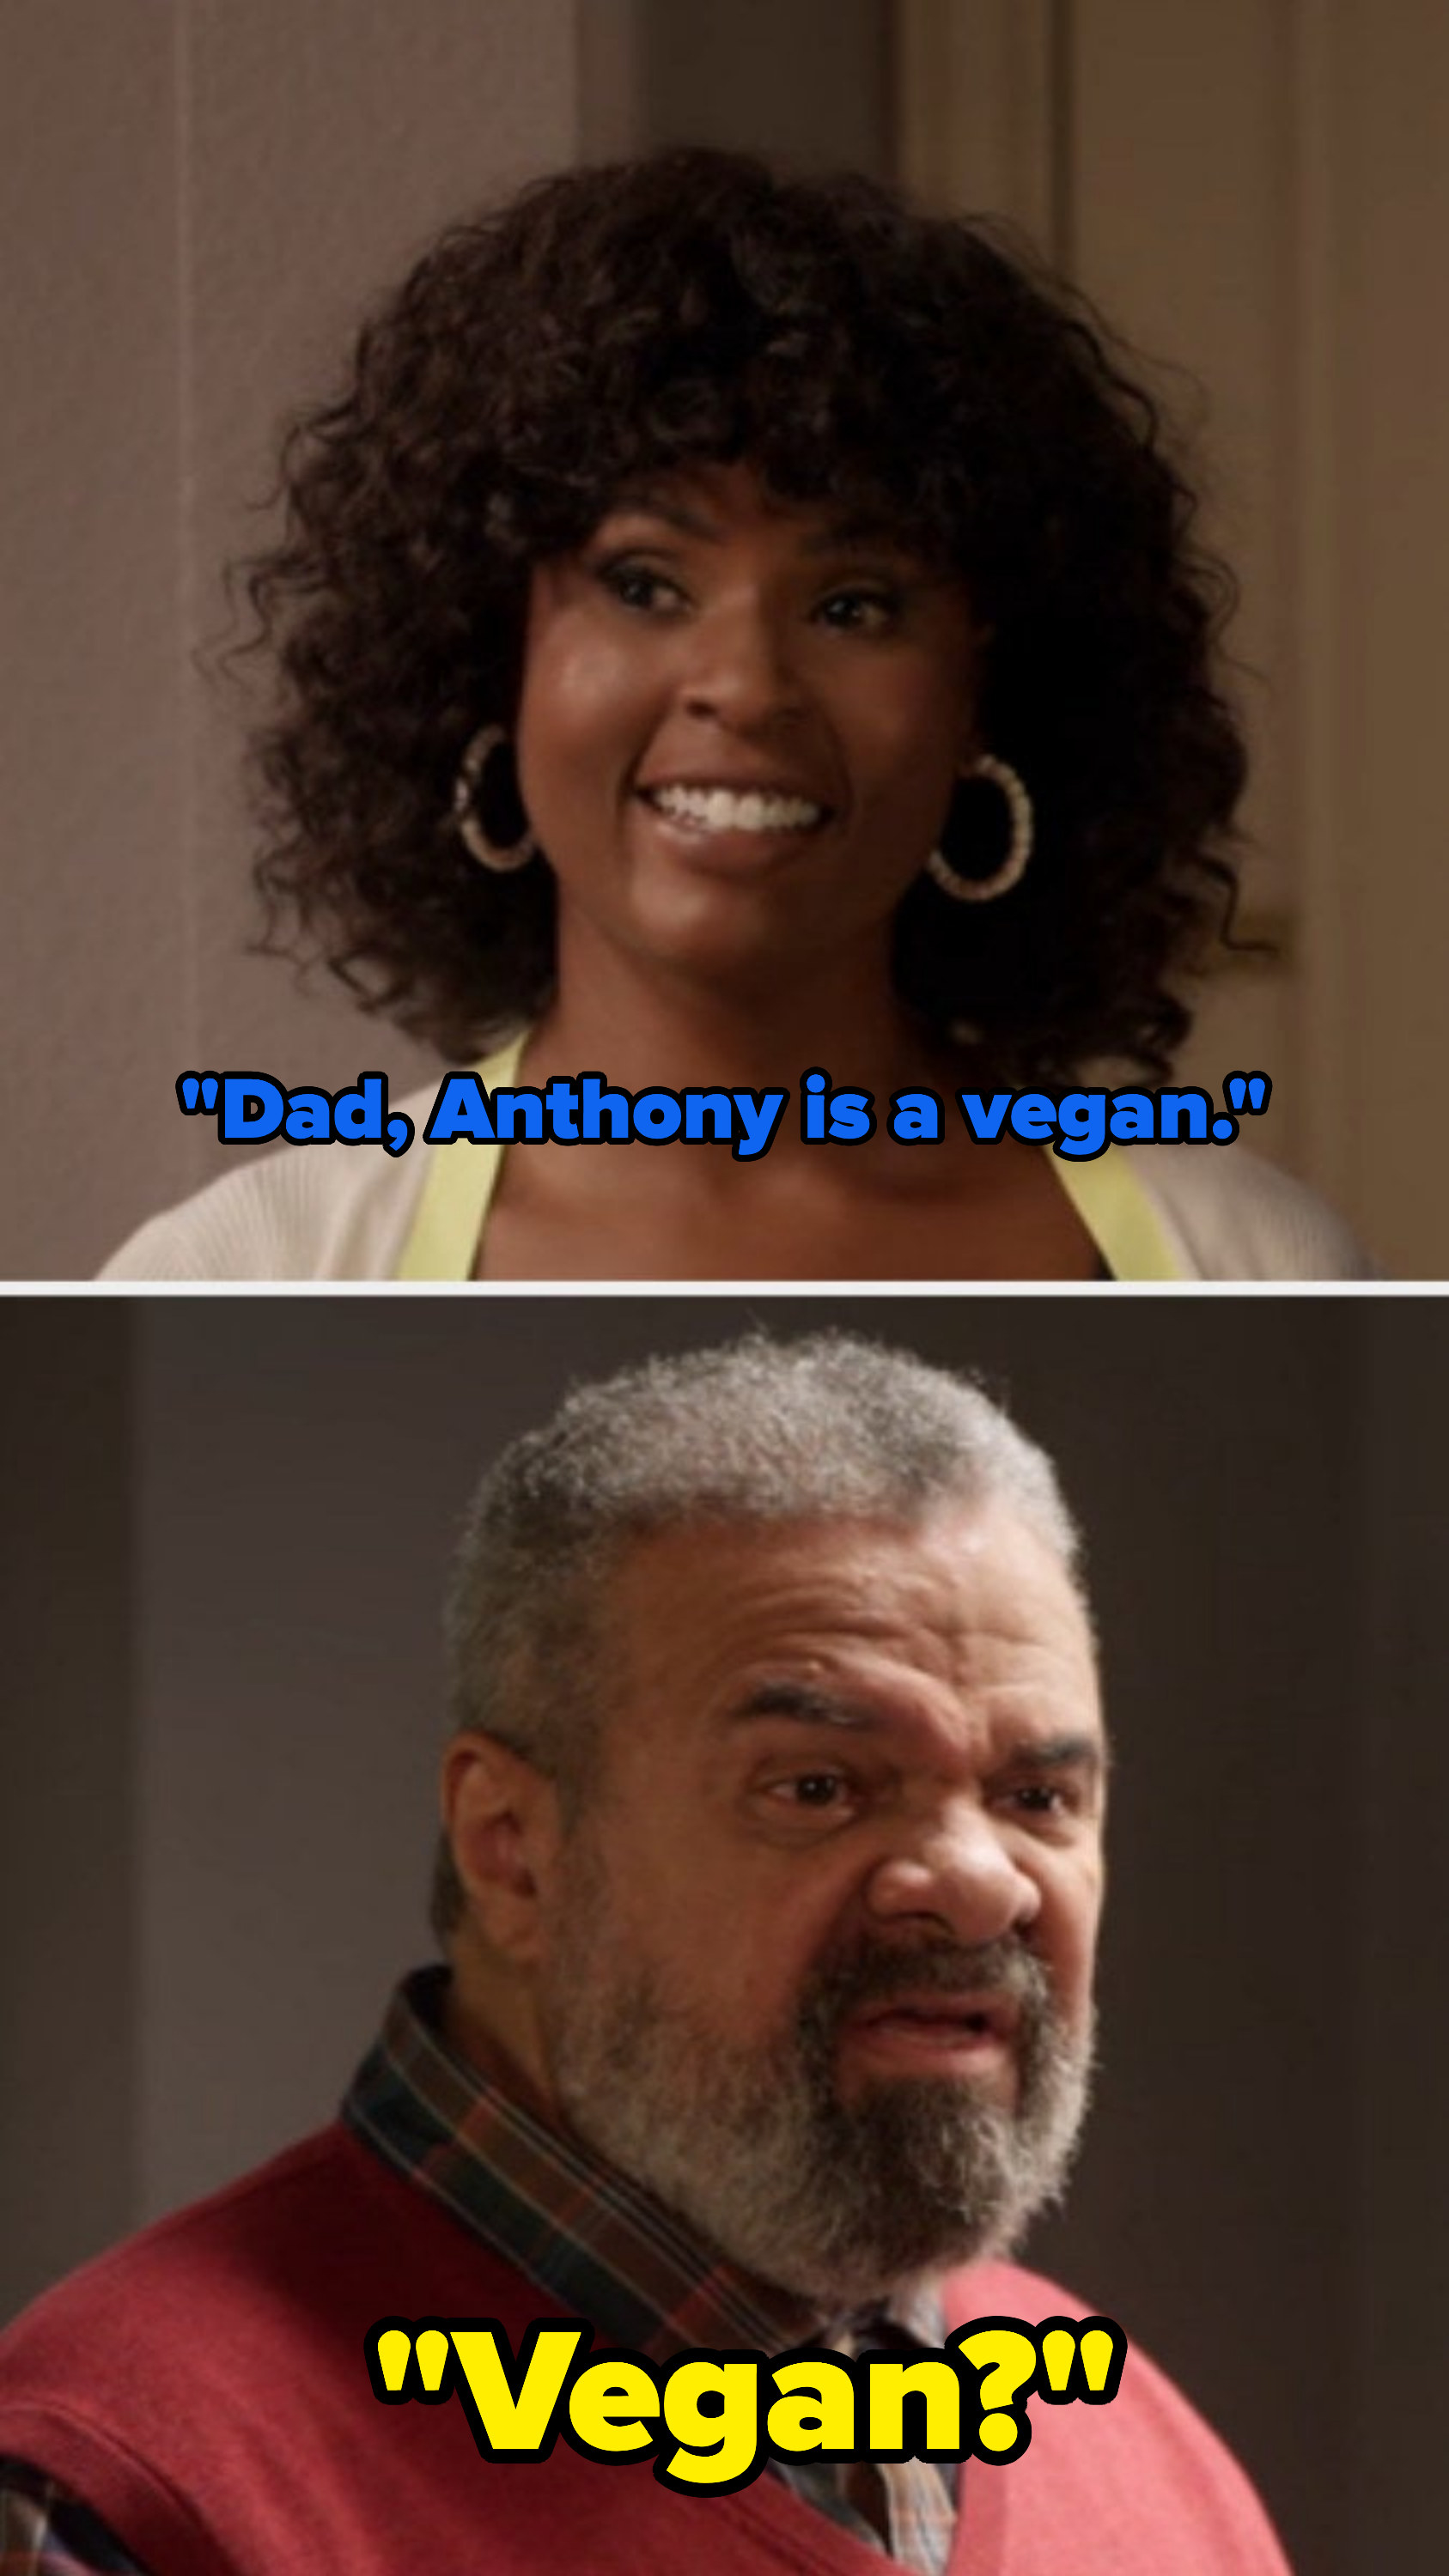 Anthony&#x27;s girlfriend&#x27;s father learns that Anthony is vegan, which is very off-putting for him